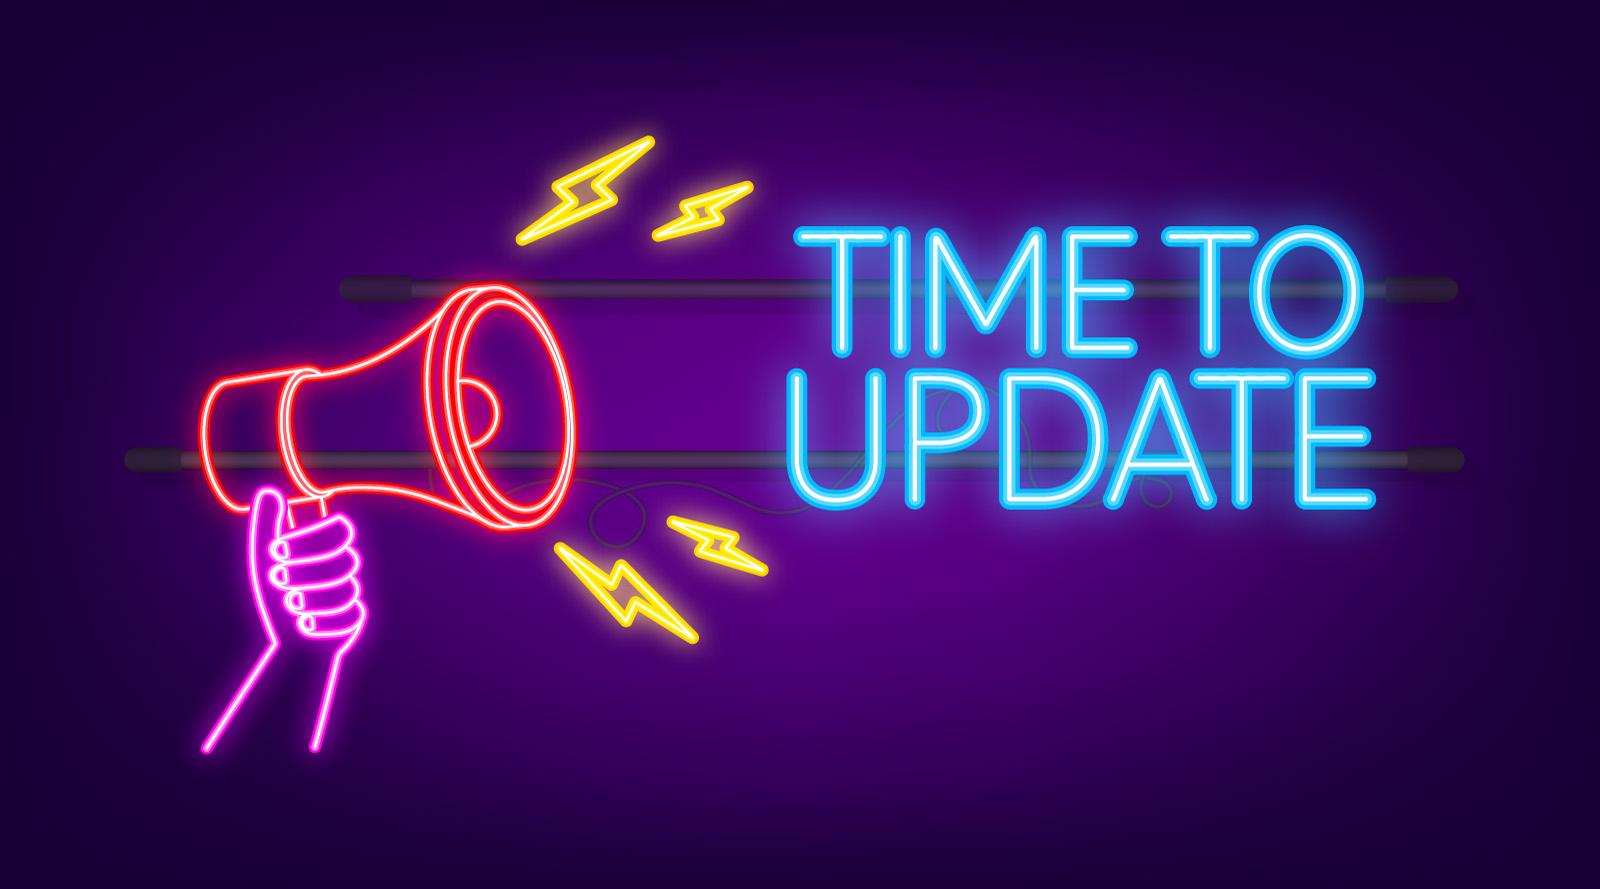 Time to Update Neon Sign - 